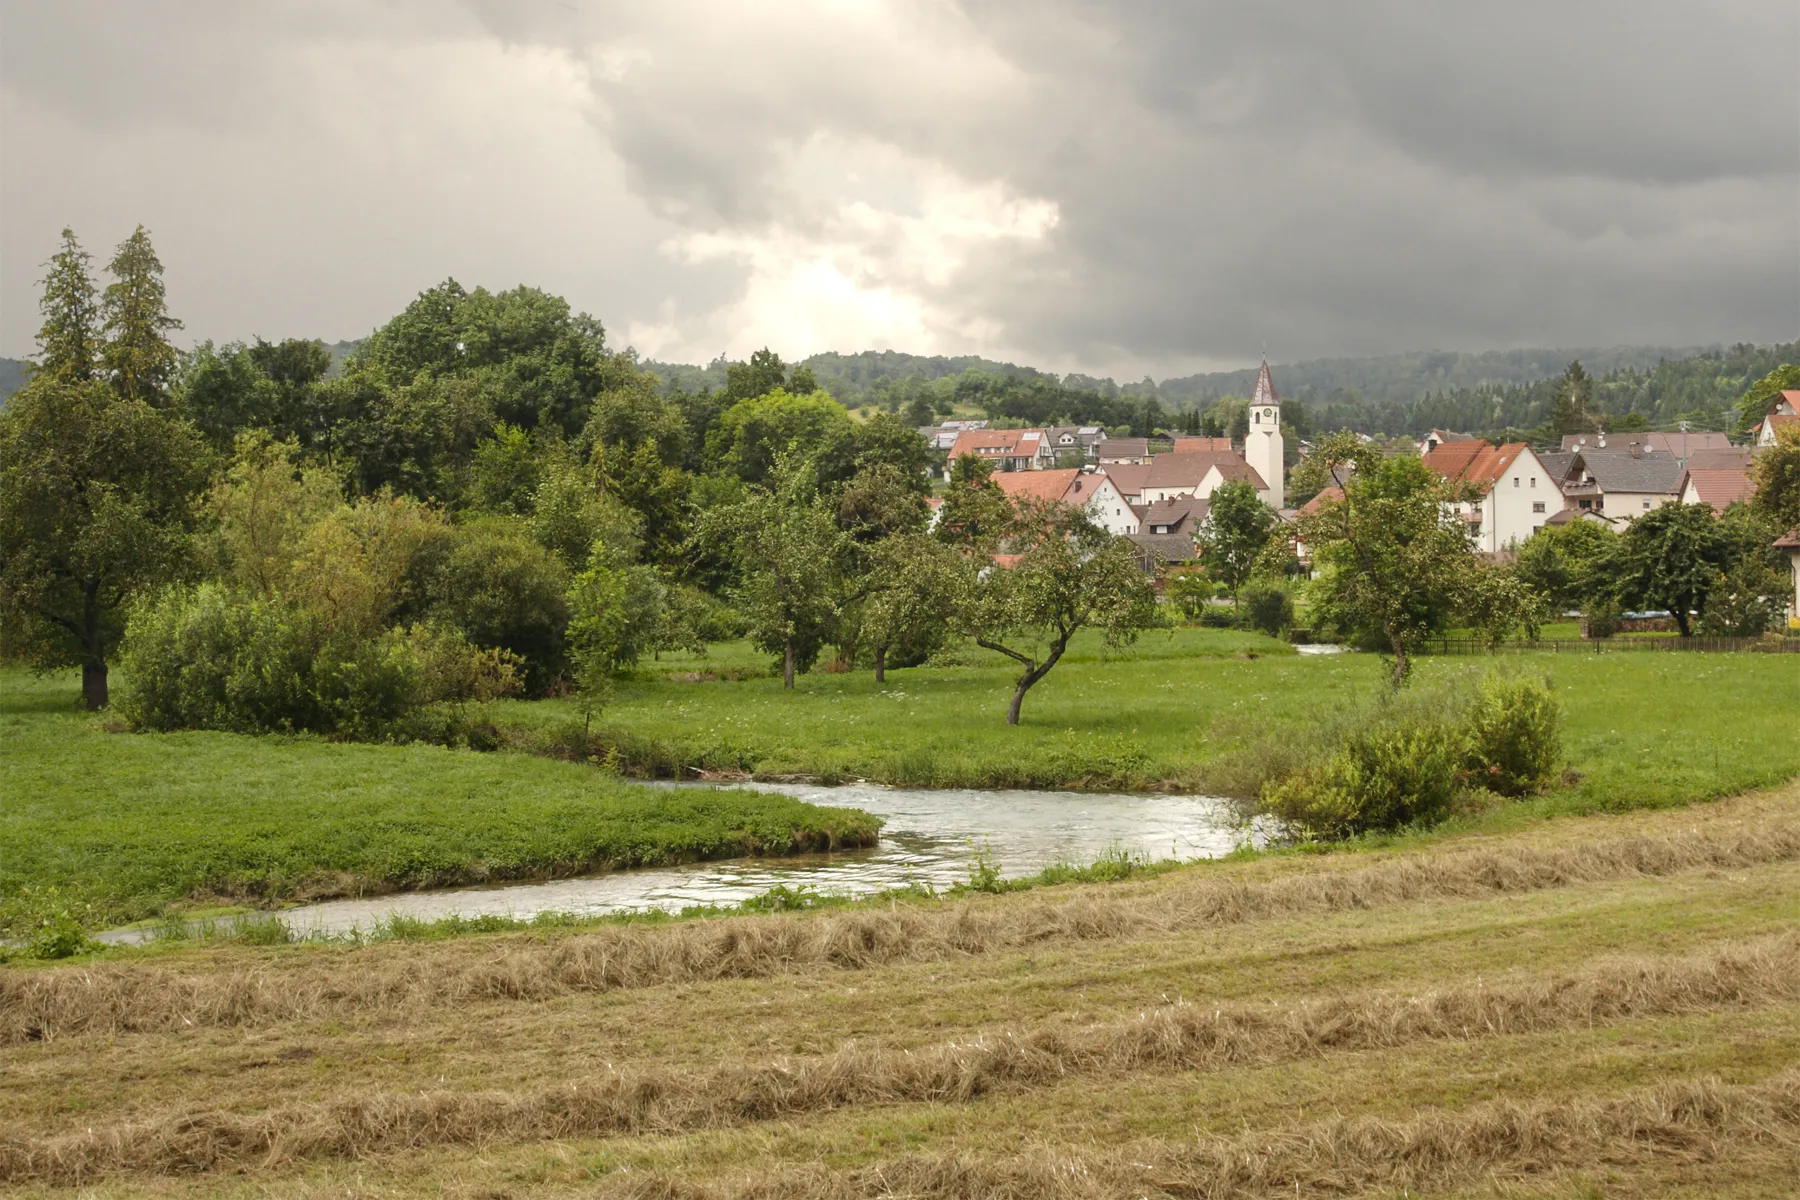 Photo showing: Small community “Oberschmeien” (part of Sigmaringen), off main routes in a narrow, picturesque valley (other photo: Typical karst valley) , Western Swabian Alb. Although the Swabian Alb is karstic, there is a perennial rivulet in the valley. The valley has a prominent hydrogeological history going far back into tertiary times. Erosion, deeper than 100 m,  happened mainly in periglacial times.
An old single railway, although being the highly frequented railway line Tübingen-Balingen-Sigmaringen follows smoothly the valley’s geomorphology. Prosperity today is a problem as the valley has no space for modern, technology-oriented agriculture.